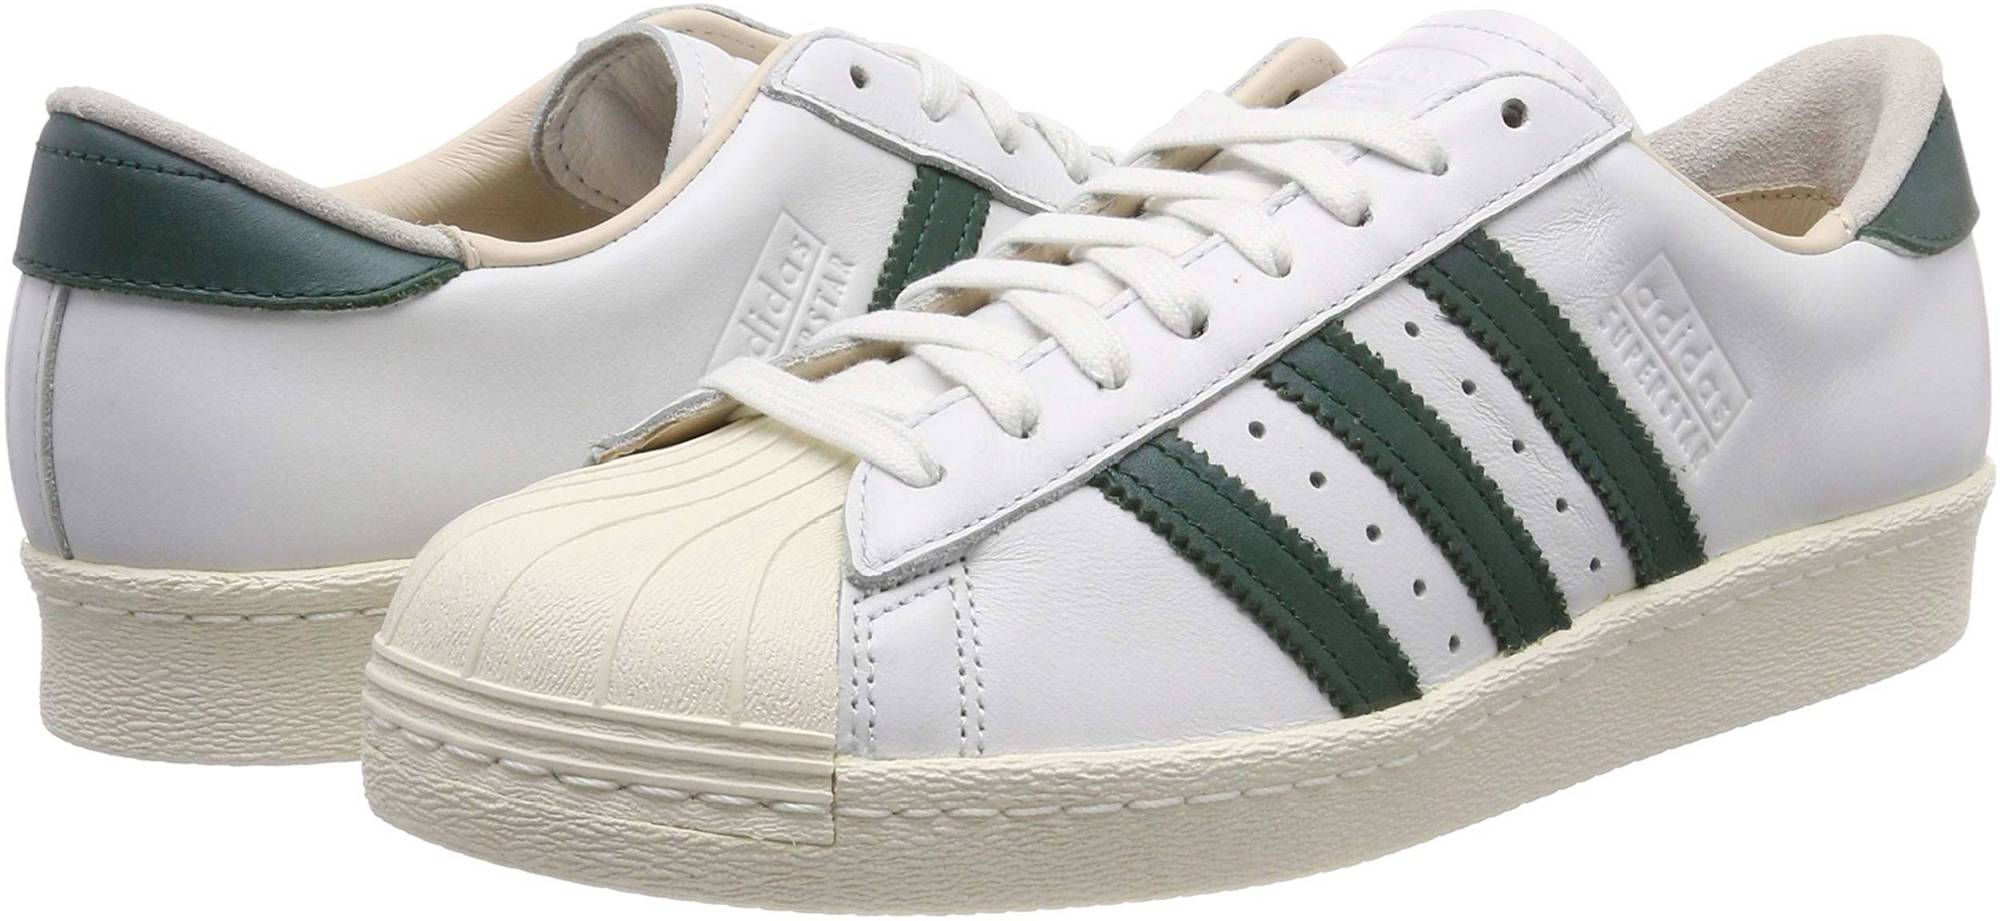 superstar 80s recon shoes